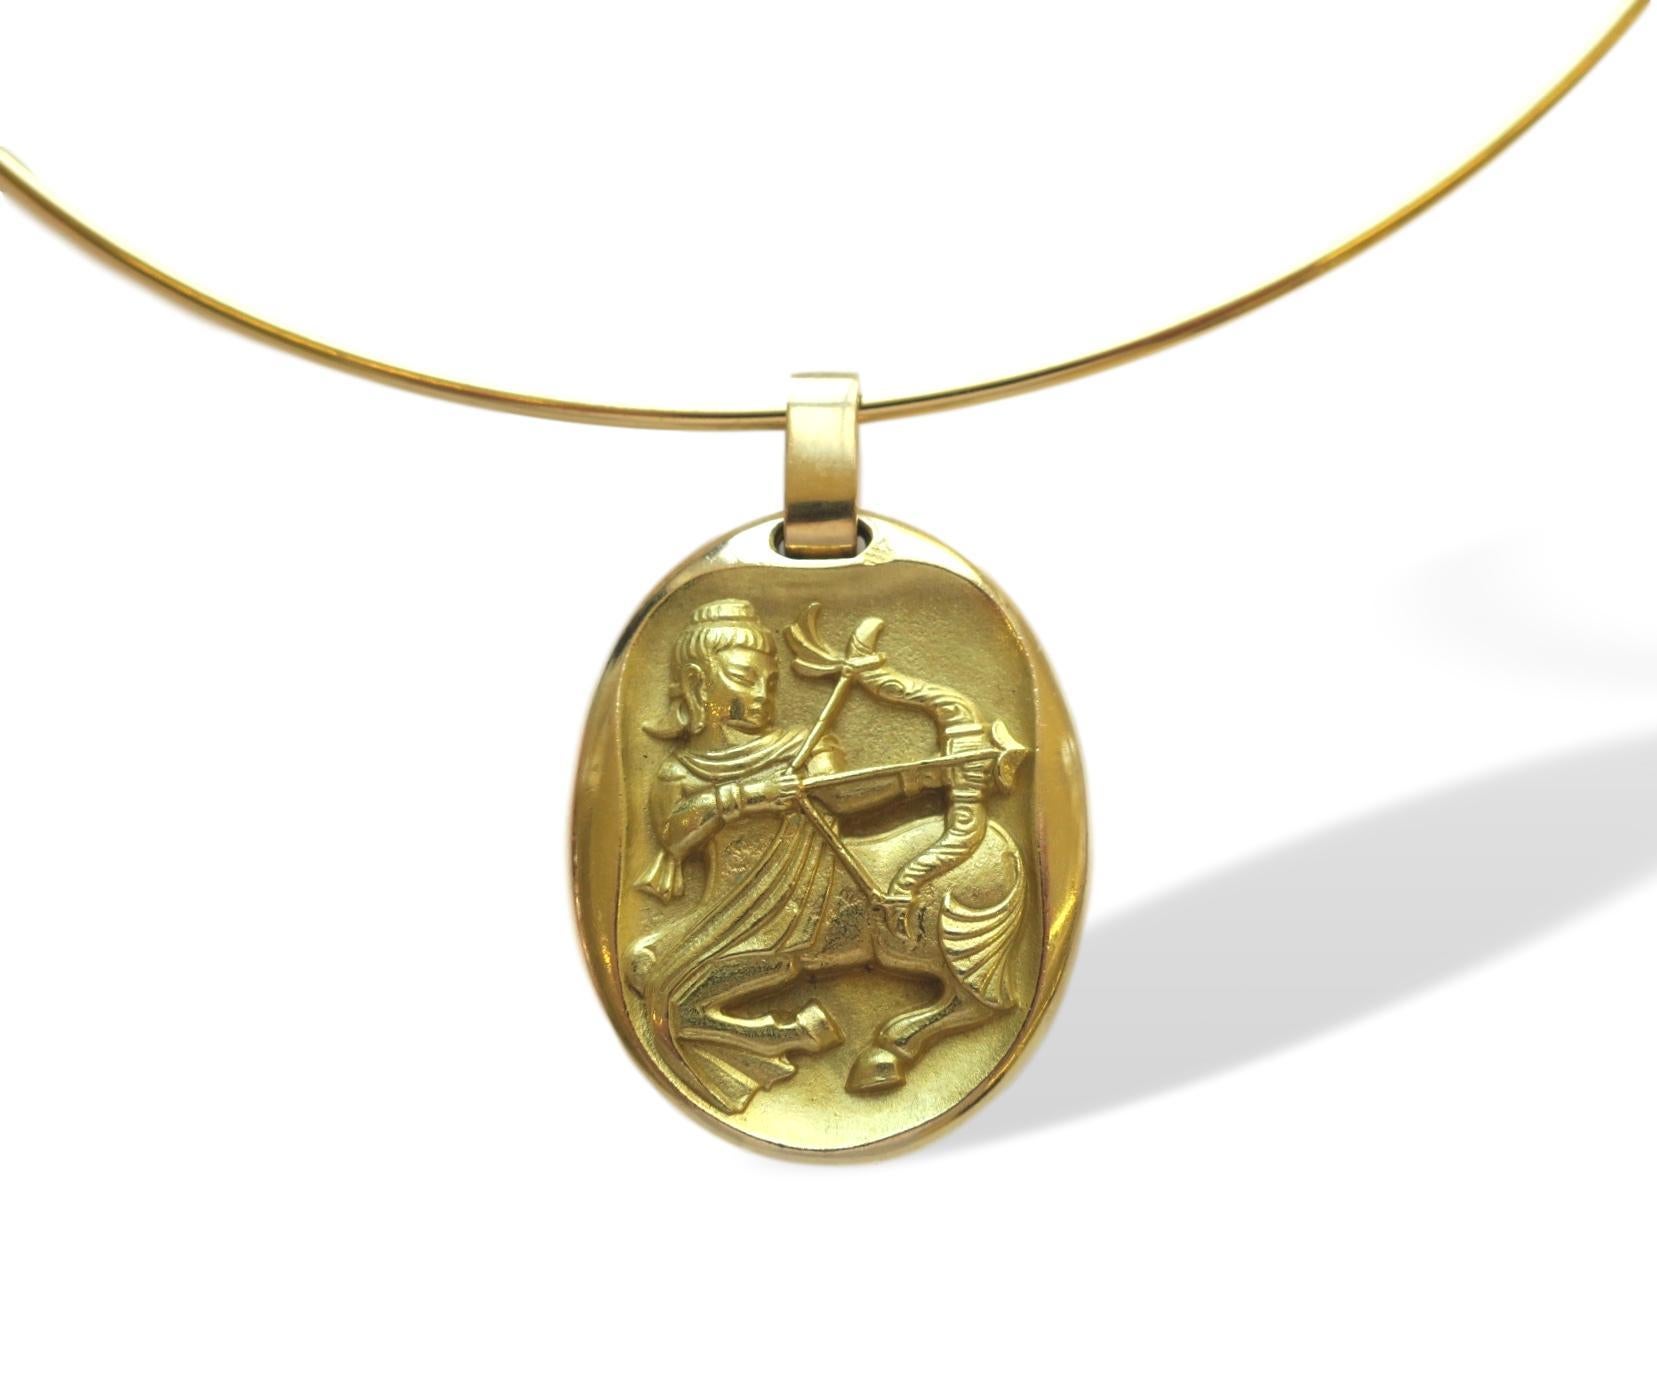 Gender- Neutral Gold Zodiac Vintage 70's Necklace by Cartier. The 1 1/2